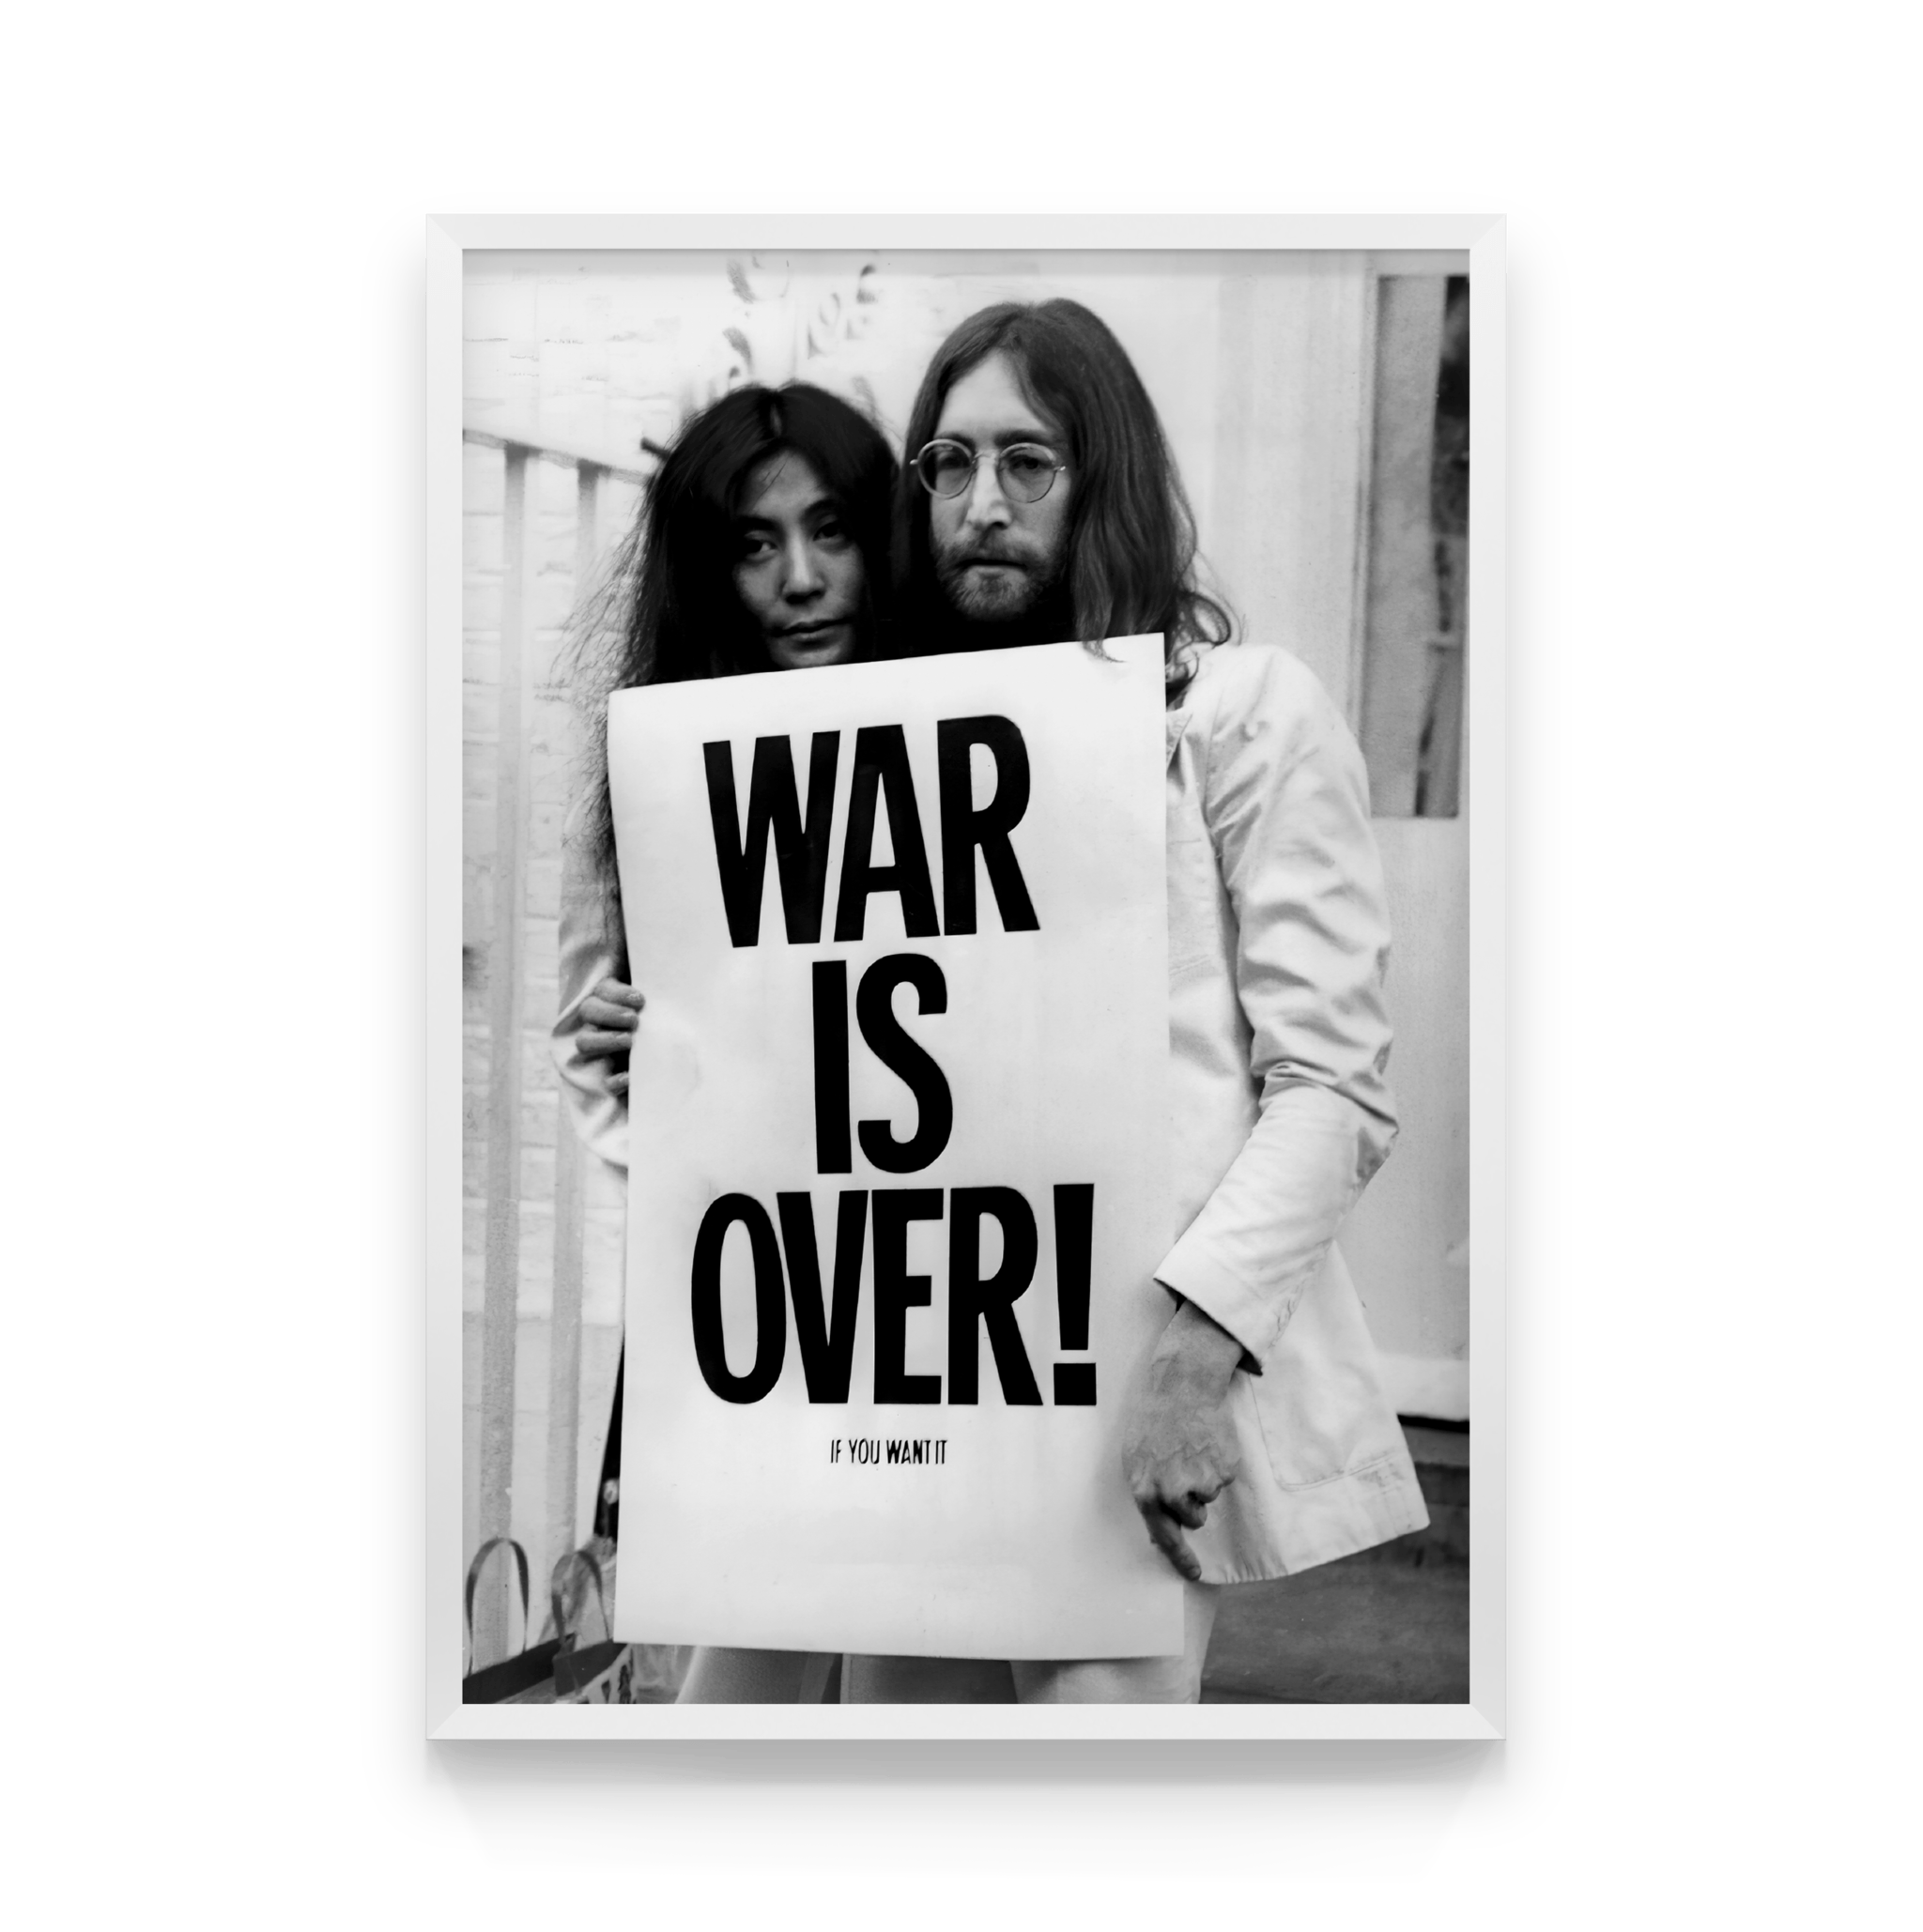 War is over! print by Editors Choice